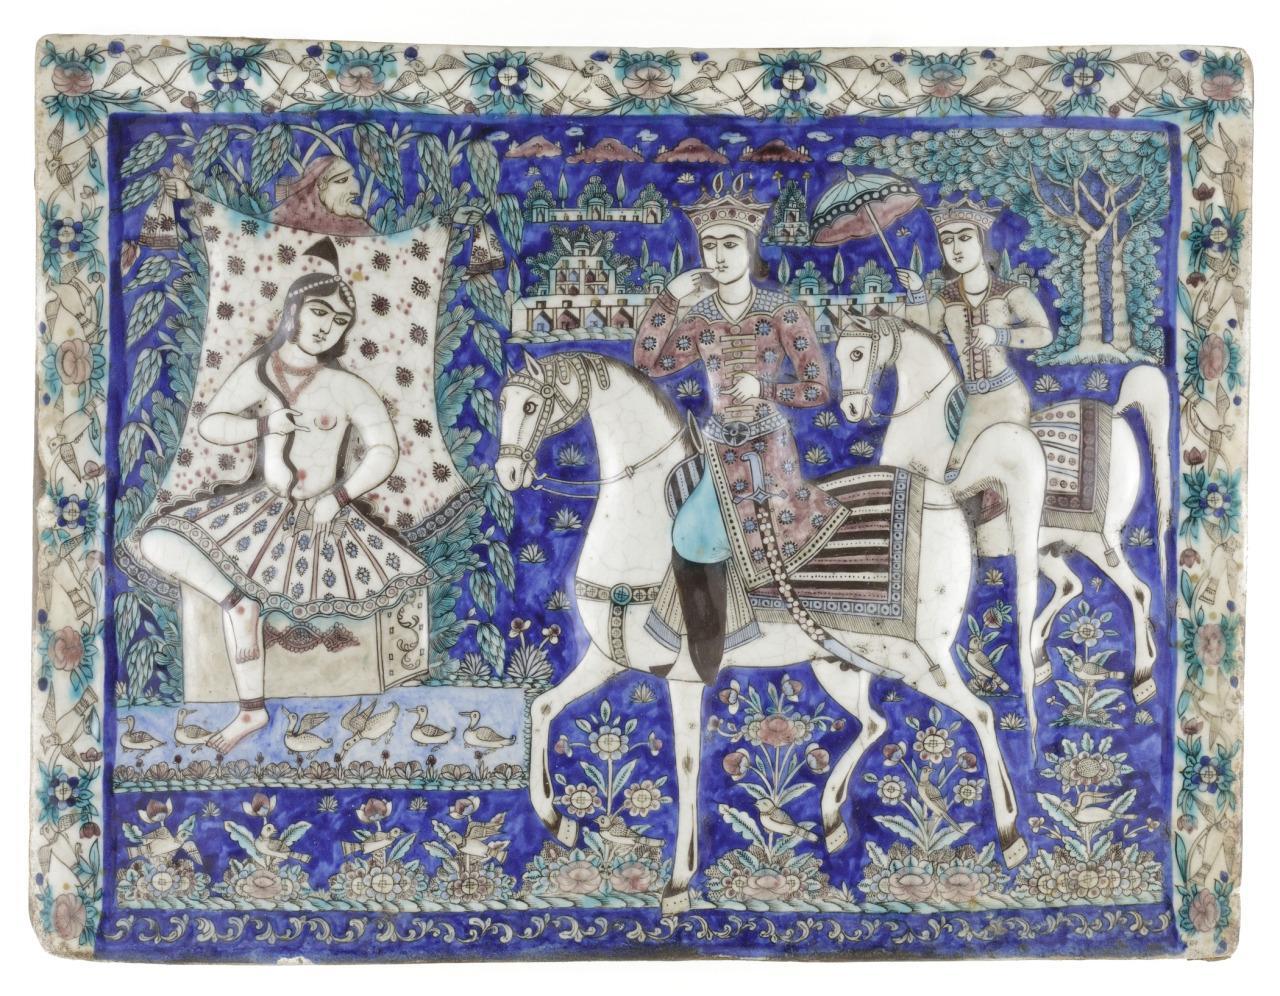 Origin: Iran, Tehran | Period:  19th century | Collection: Herbert R. Cole Collection (M.84.31.22) | Type: Ceramic http://t.co/10Rd6yng5a